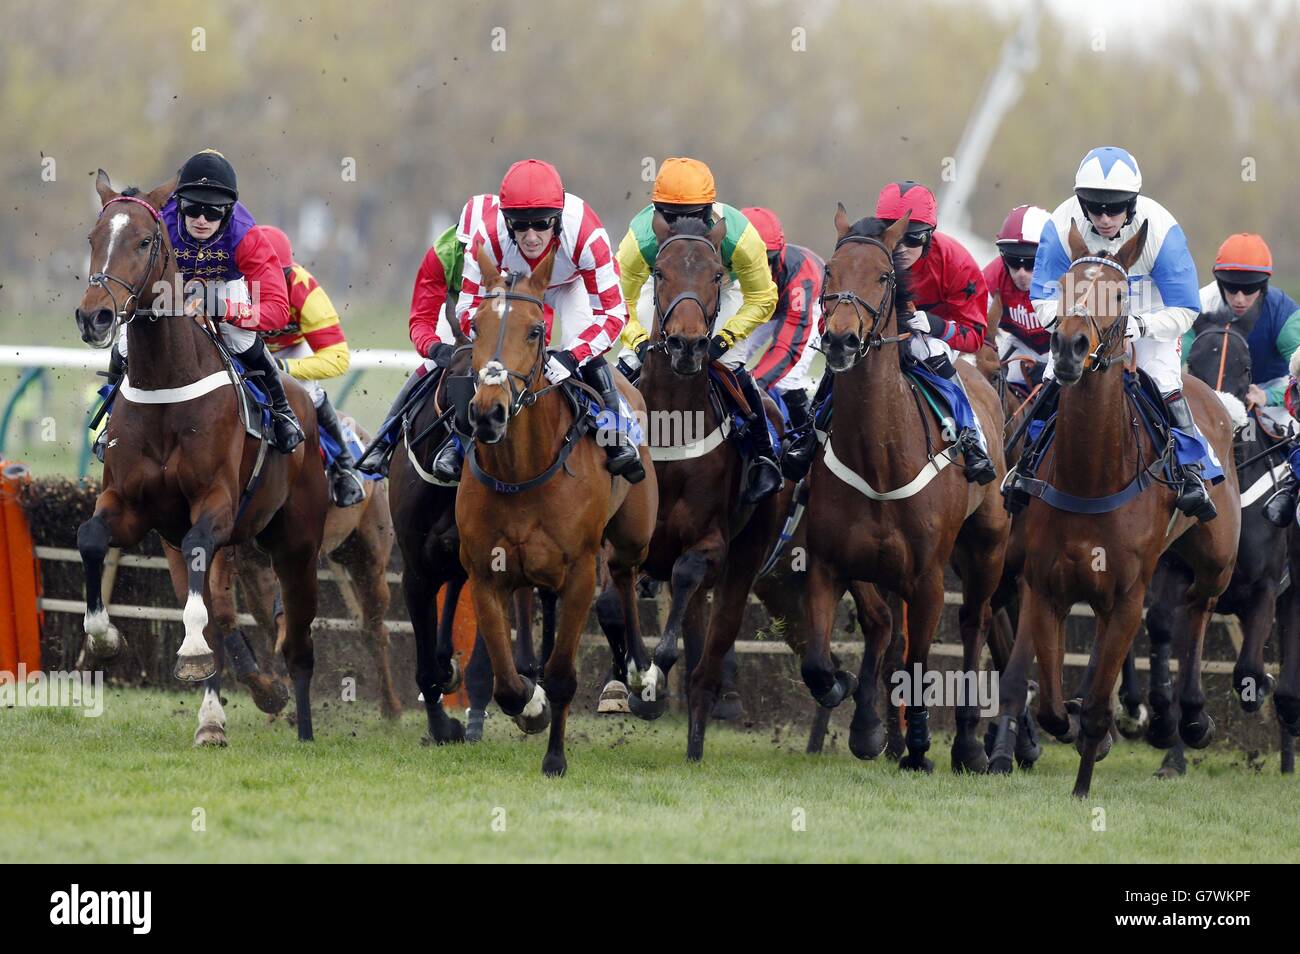 Capard King (second left) ridden by jockey Tony McCoy goes on to win the Abbott Risk Consulting Novices' Handicap Hurdle Race (Class 3) during the 2015 Coral Scottish Grand National Festival at Ayr Racecourse. Stock Photo